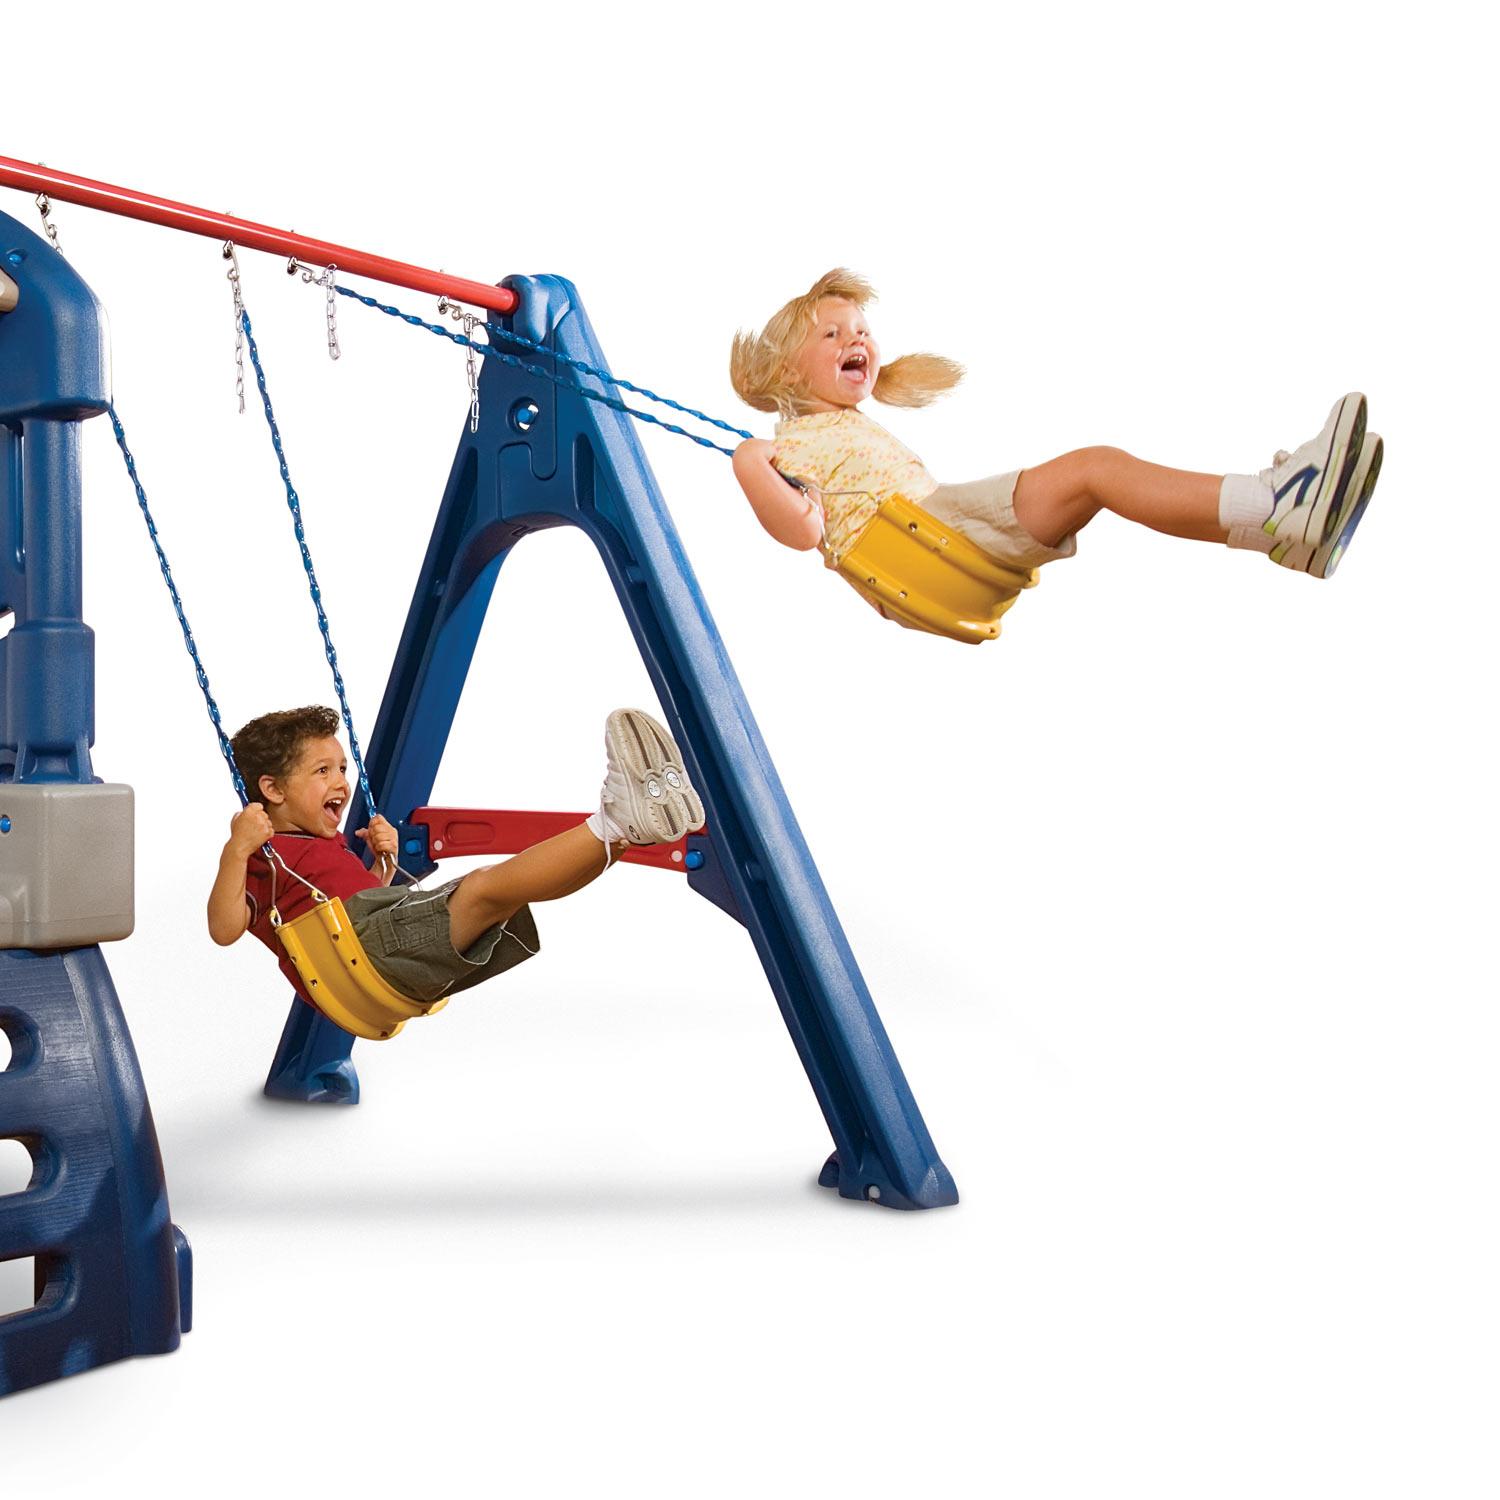 Little Tikes Clubhouse Swing Set - image 4 of 5